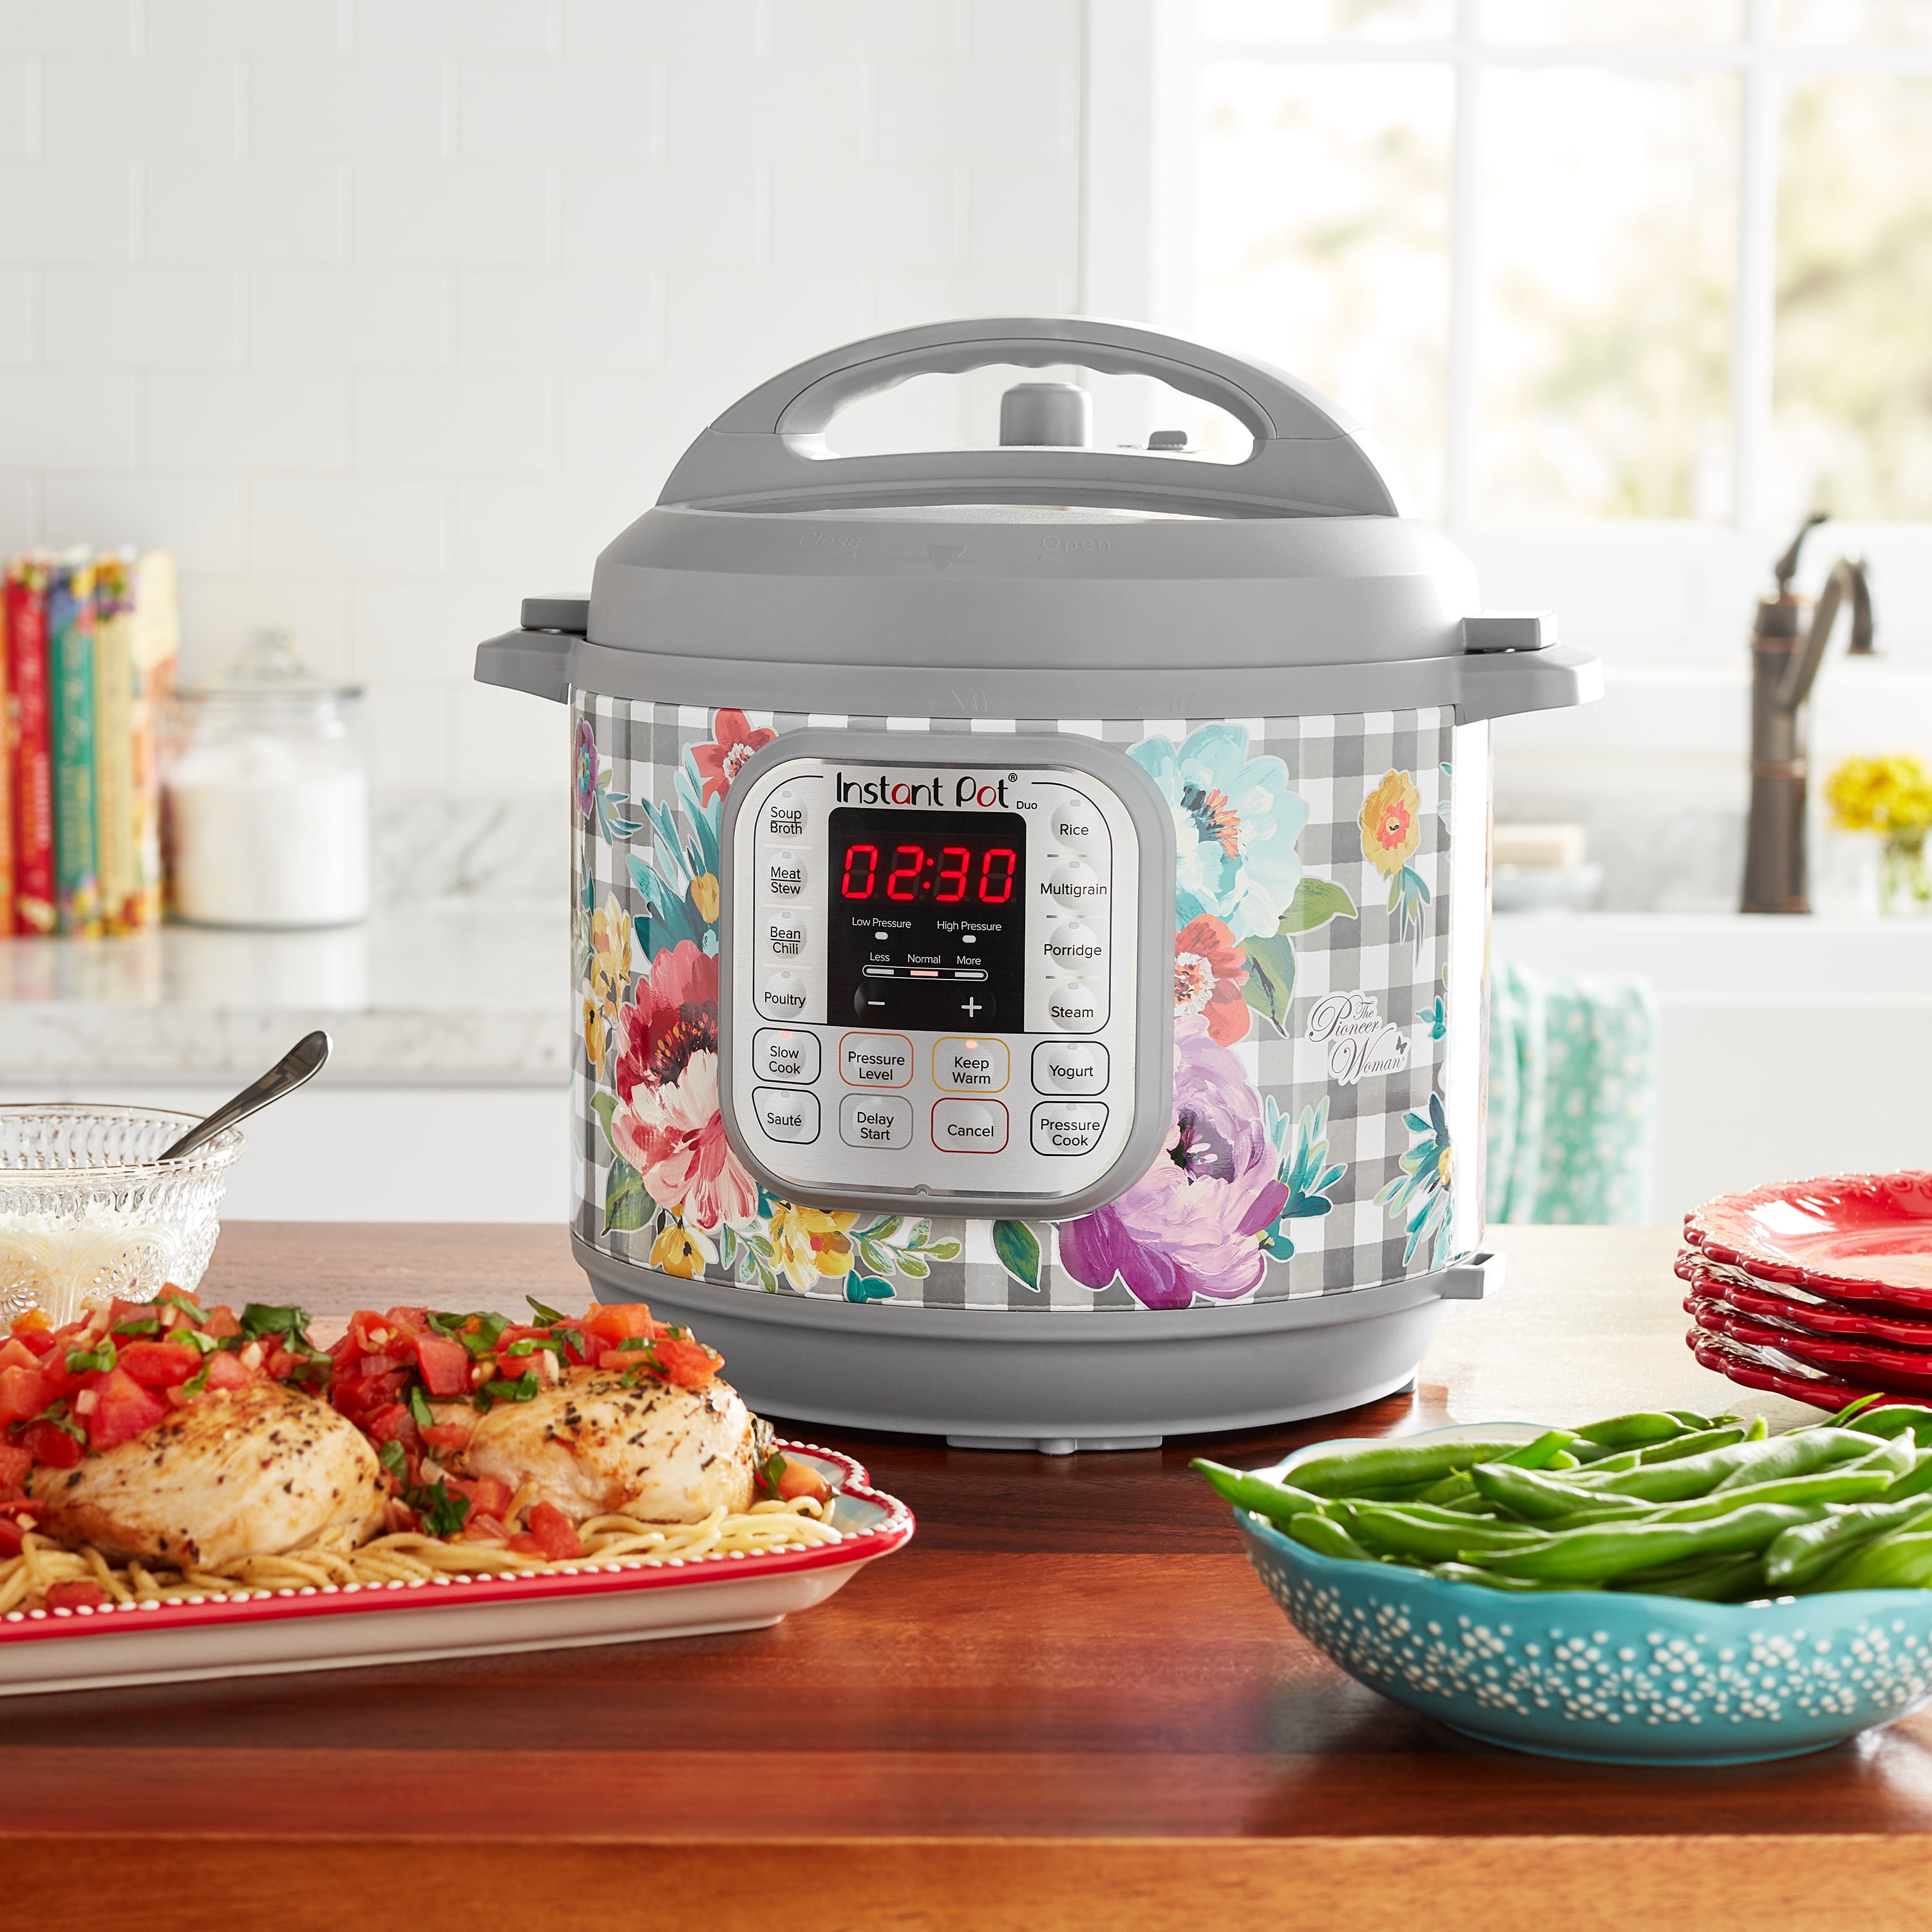 Pioneer Woman Instant Pots debut at Walmart and they are precious